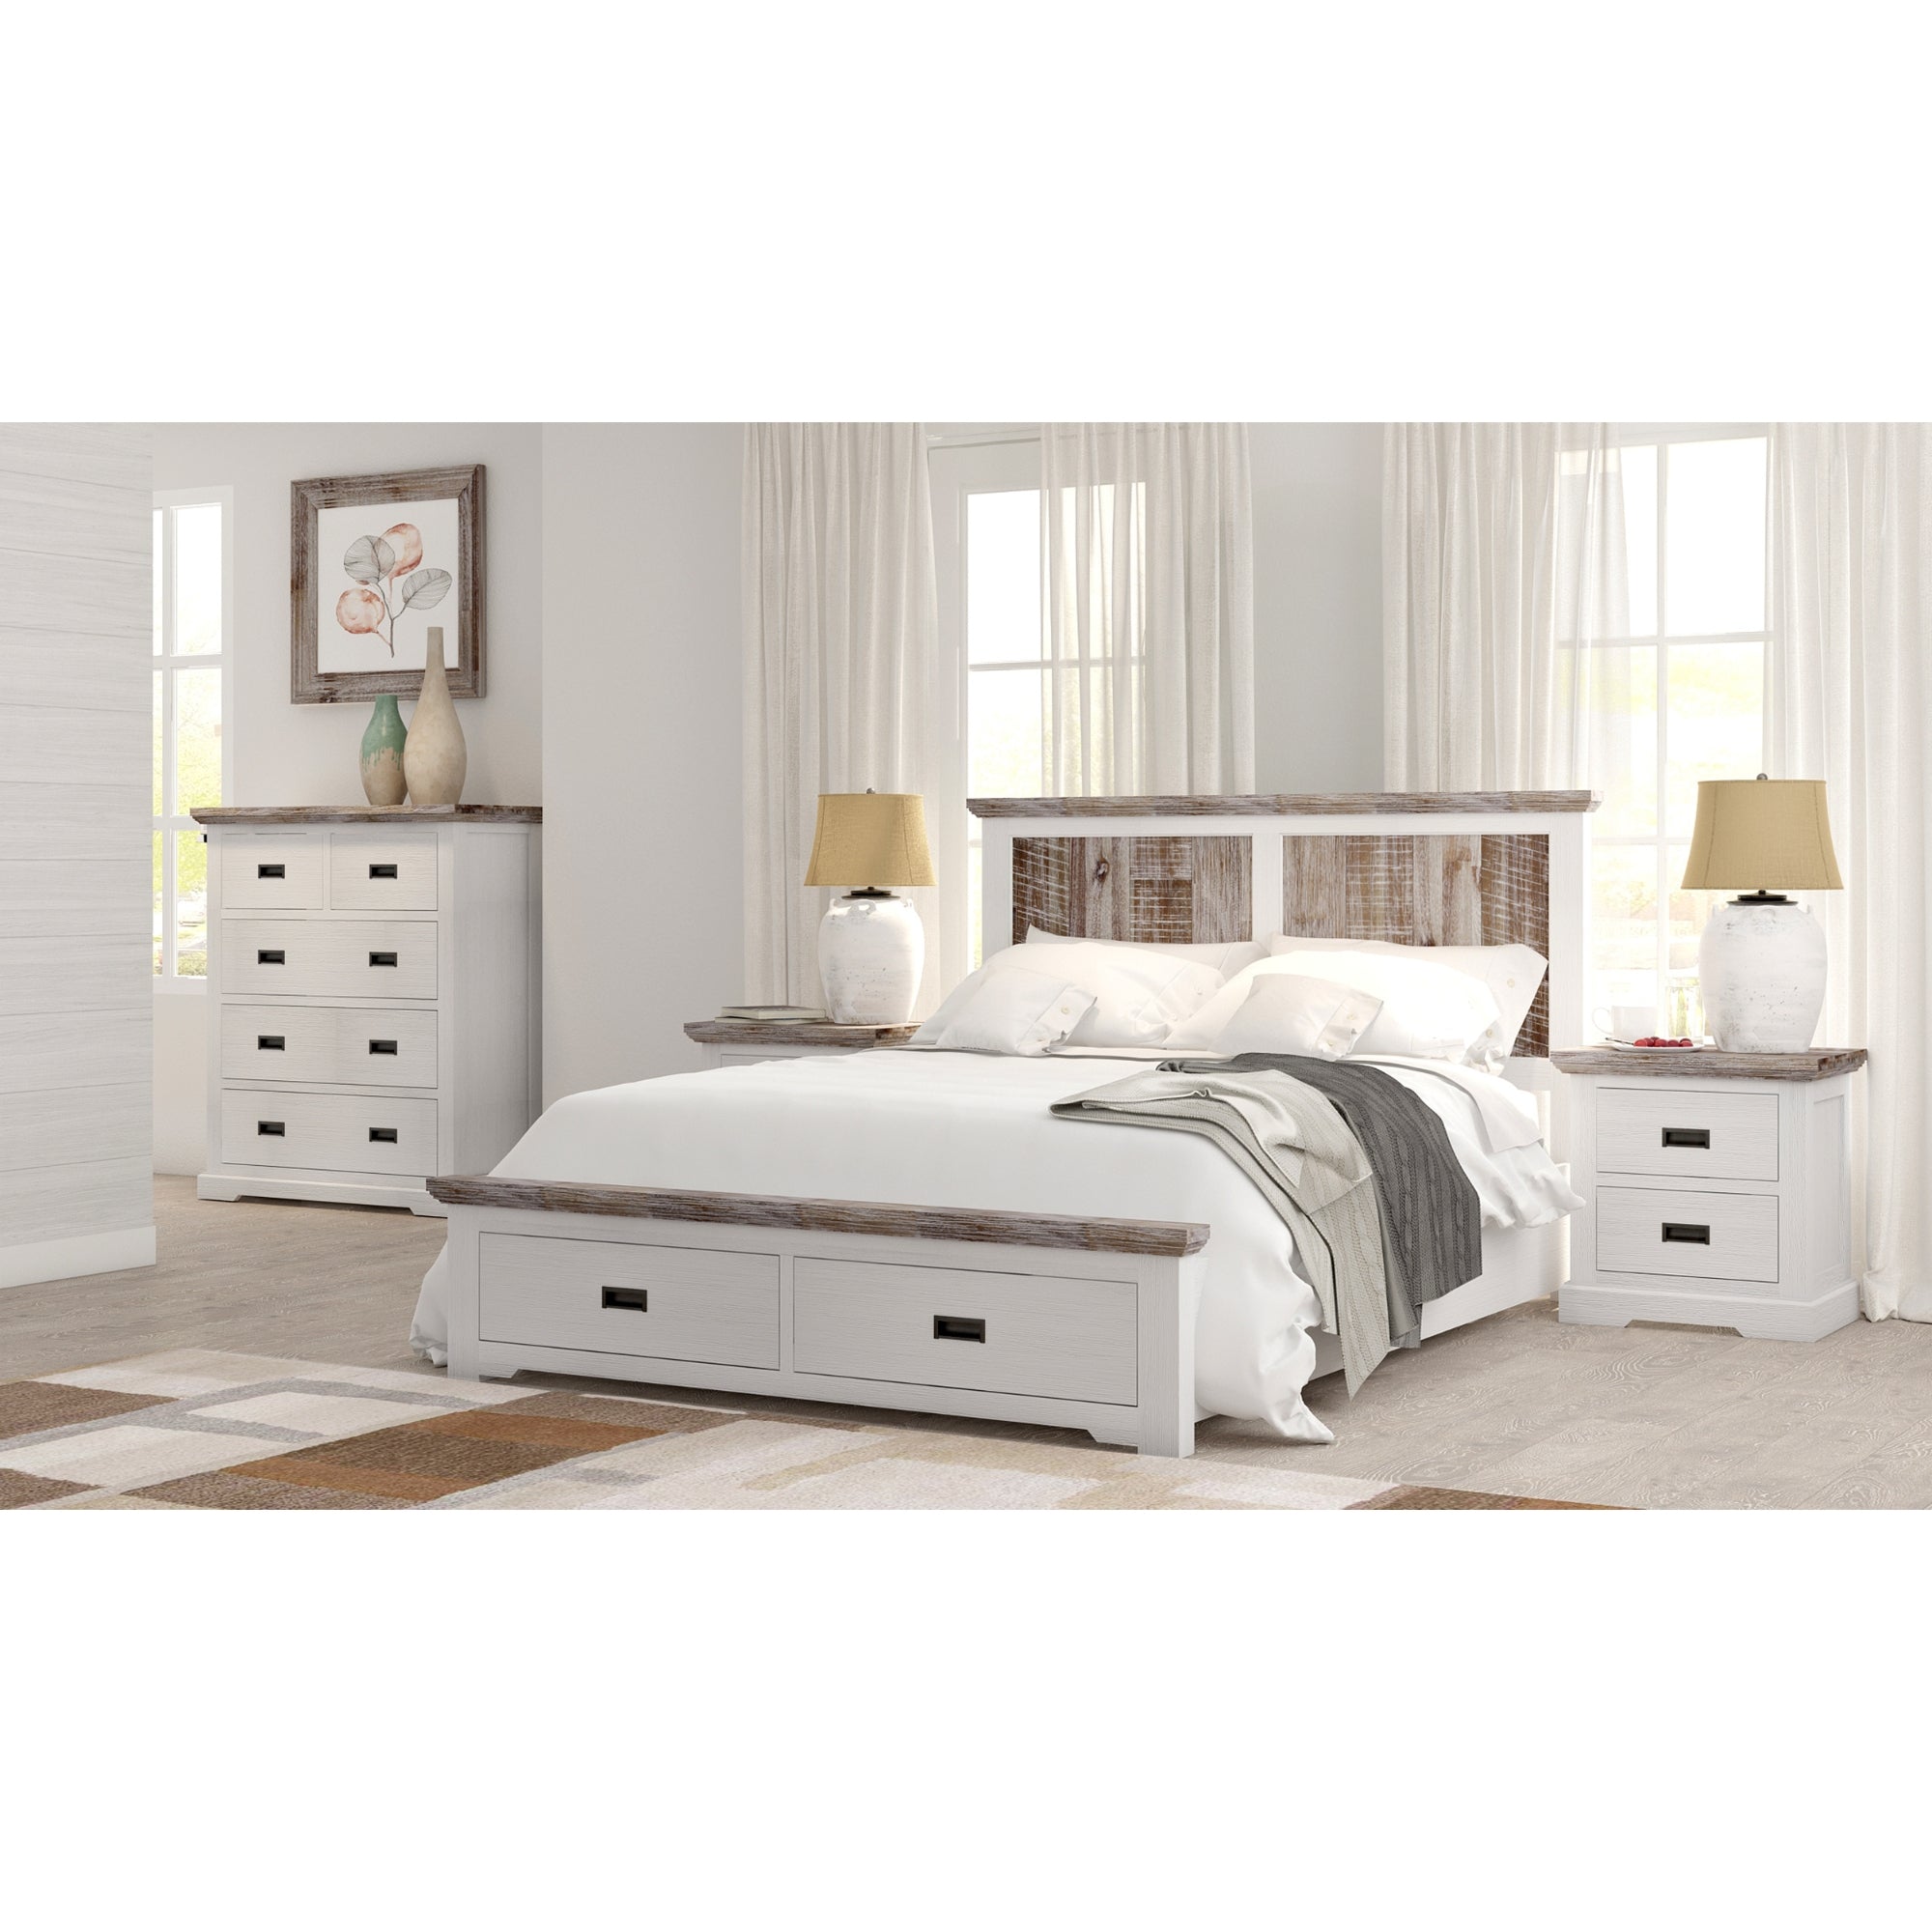 King Bed Frame, Storage Drawers, Solid Acacia Timber